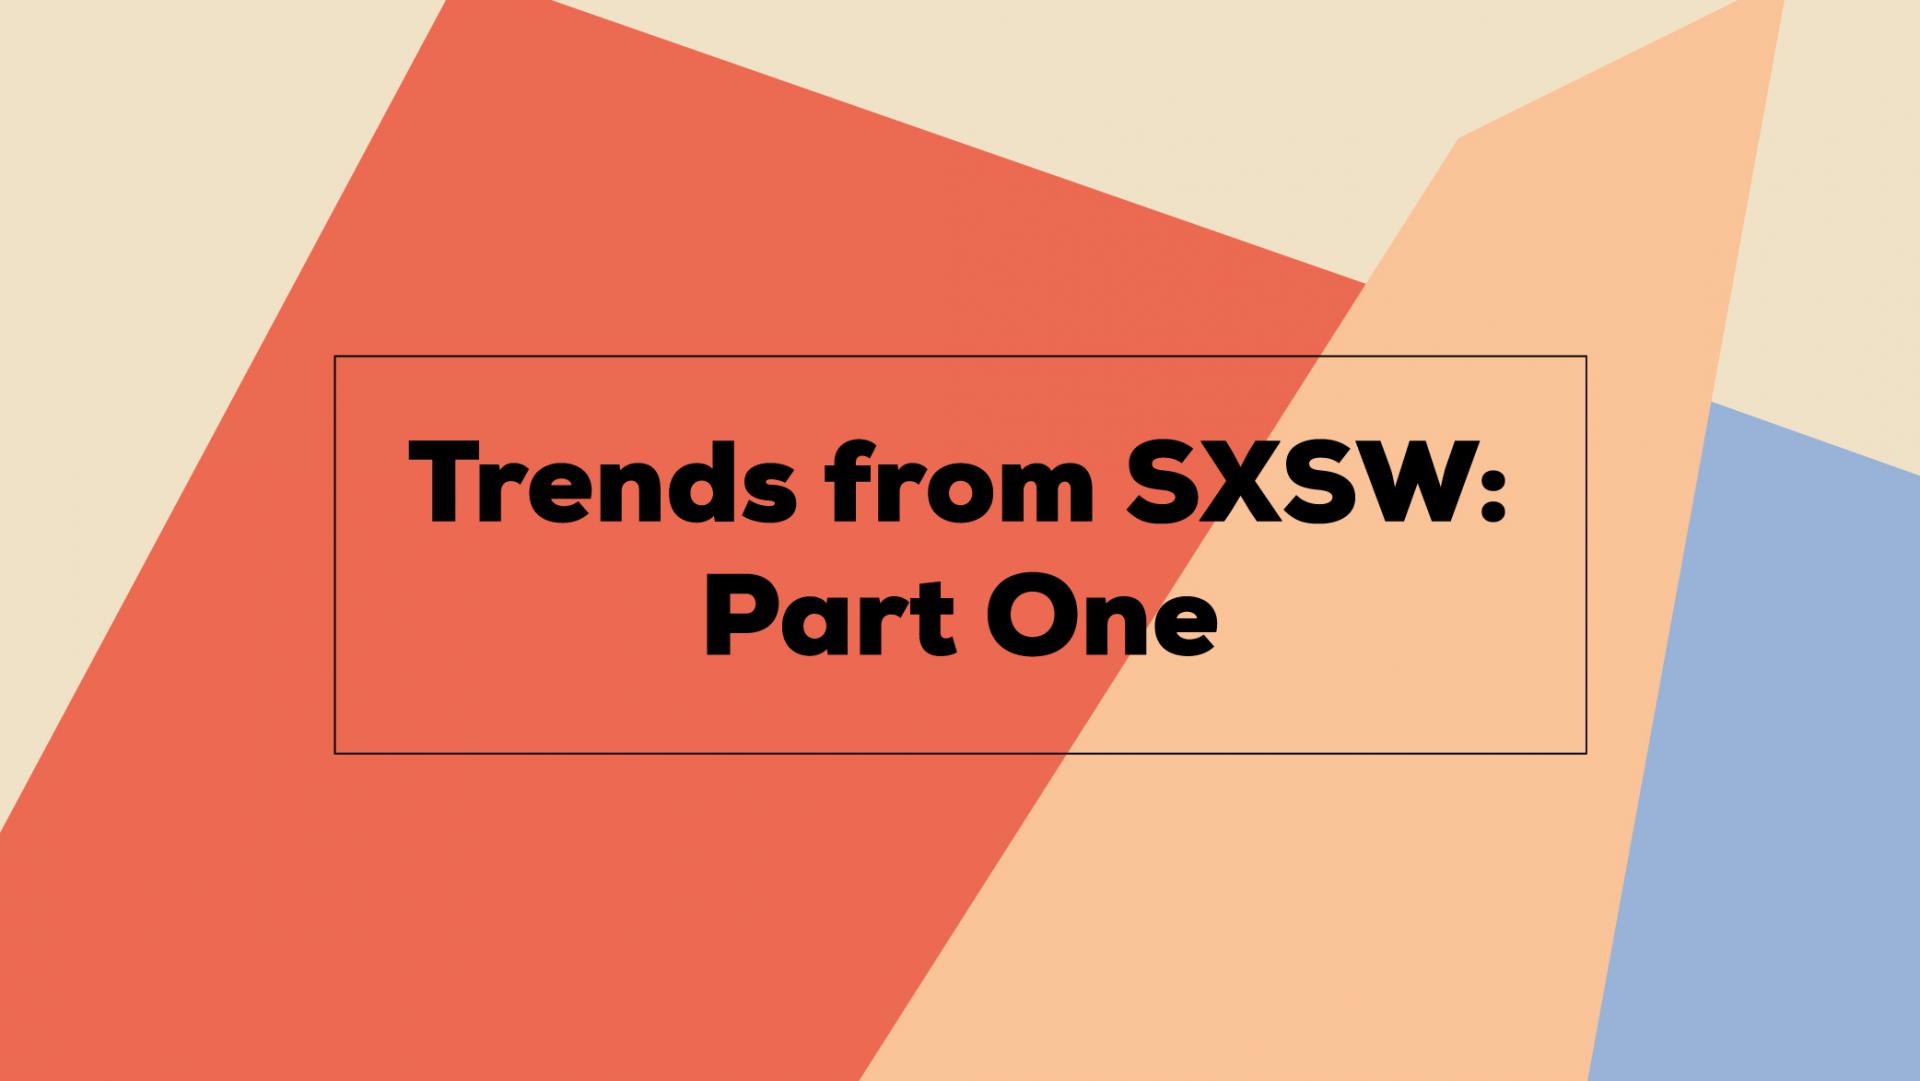 Image with text: trends from SXSW: Part One.